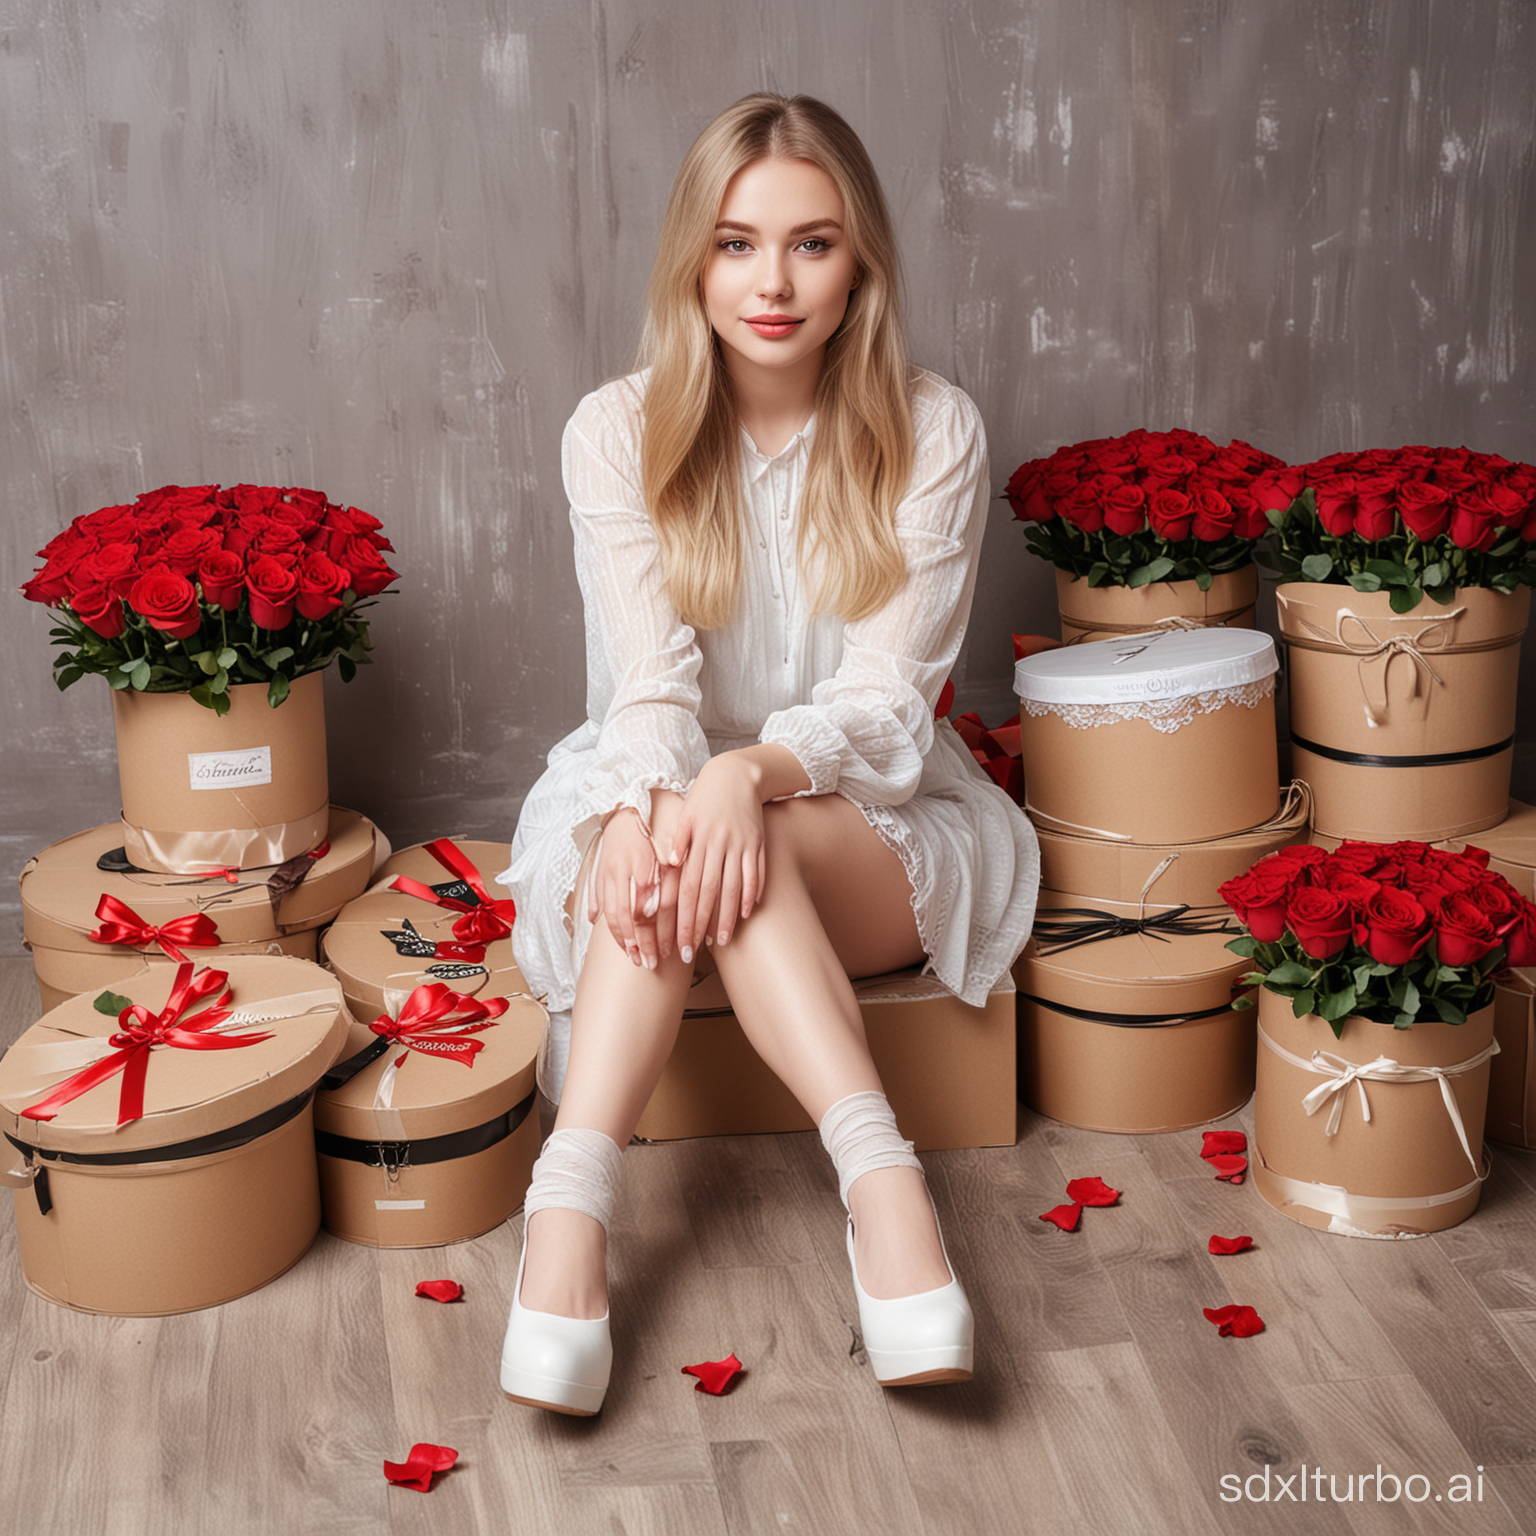 A beautiful white-skinned girl is sitting on the floor. Next to her are a lot of hatboxes with red roses